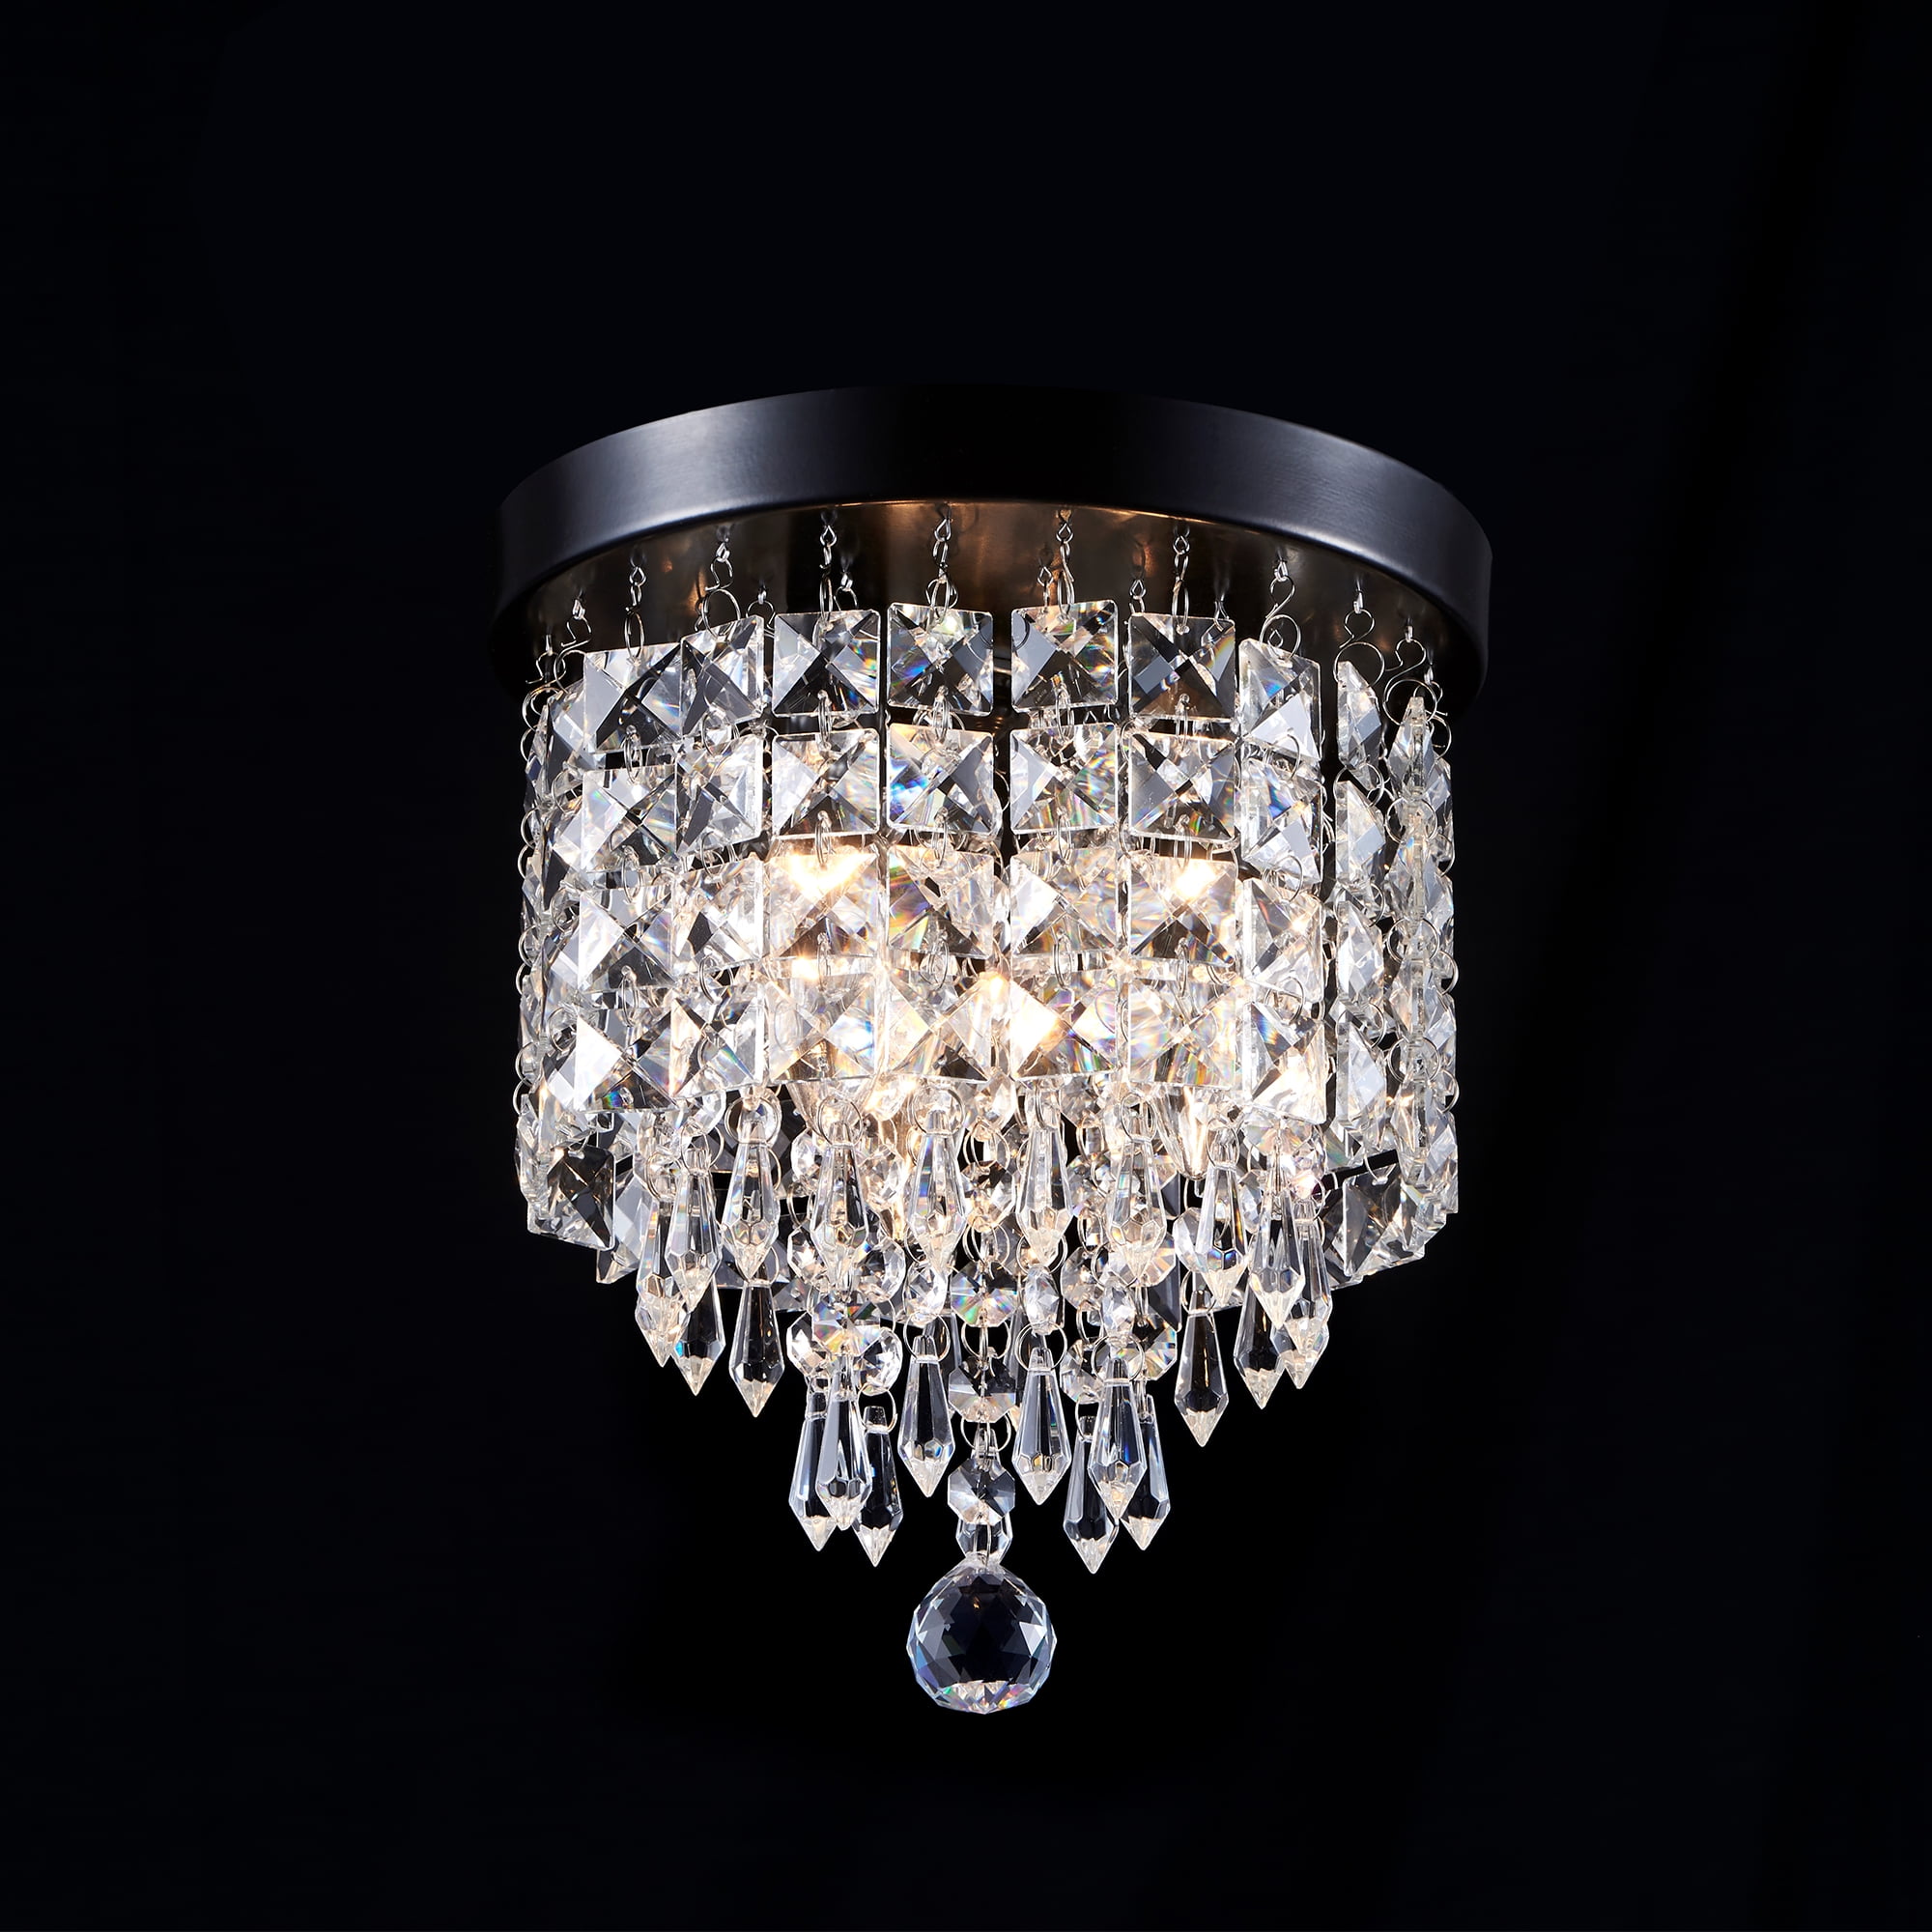 Luxury Spectacular Square Crystal Flush Mount Ceiling Fixture Light 5-Star Hotel 